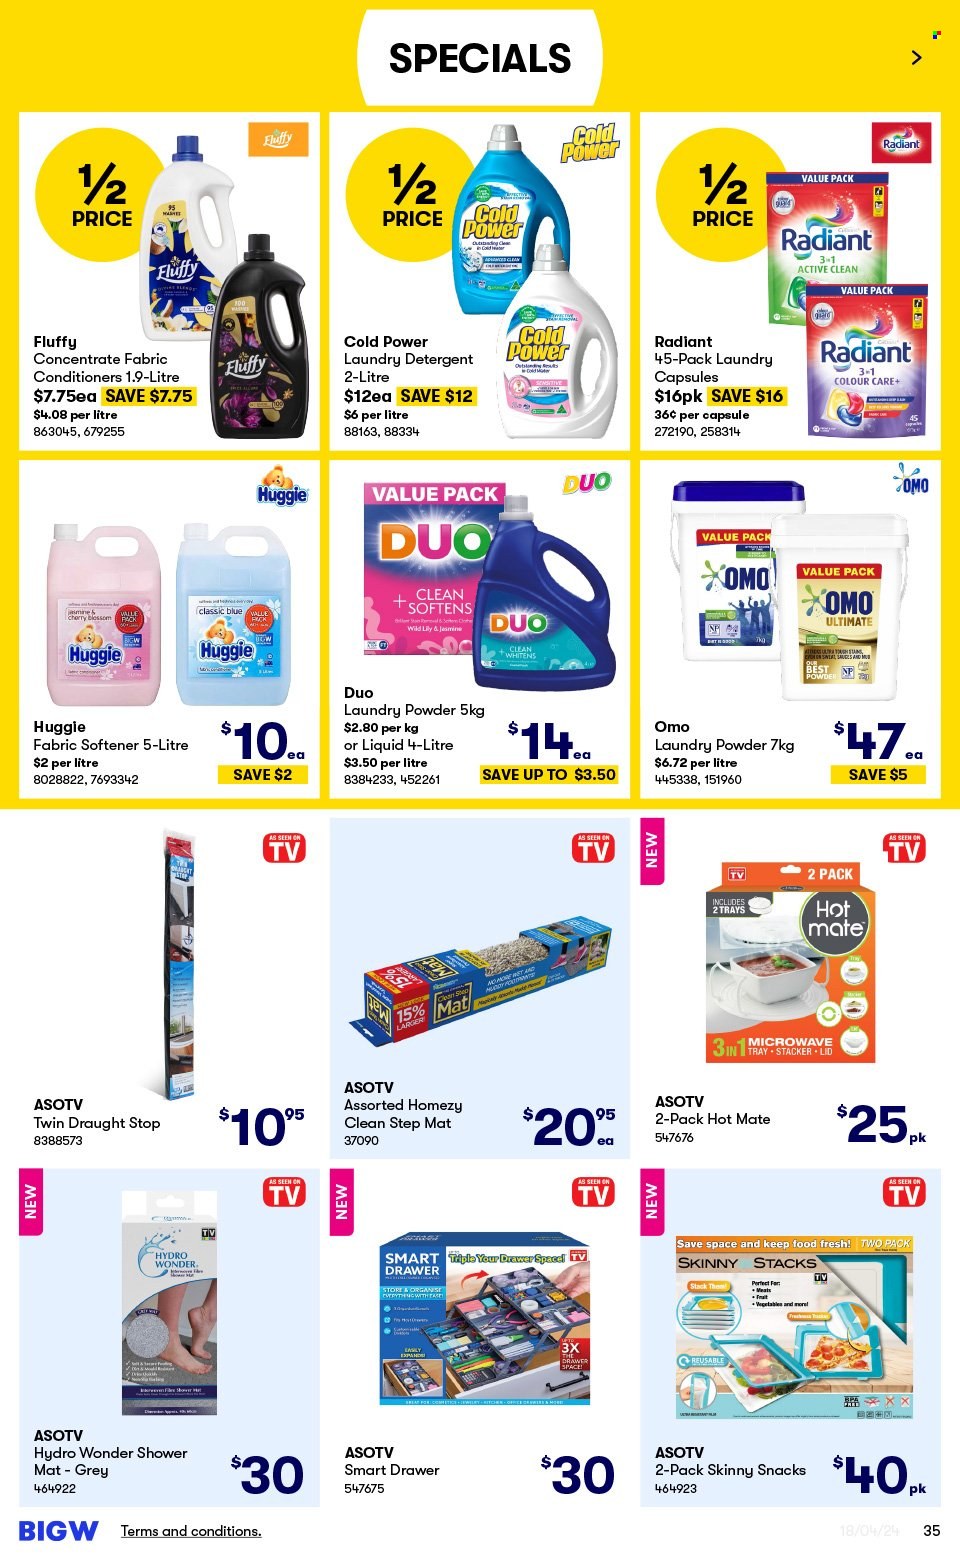 thumbnail - BIG W Catalogue - Sales products - detergent, fabric softener, Omo, laundry powder, laundry detergent, laundry capsules, lid, microwave, lily. Page 35.